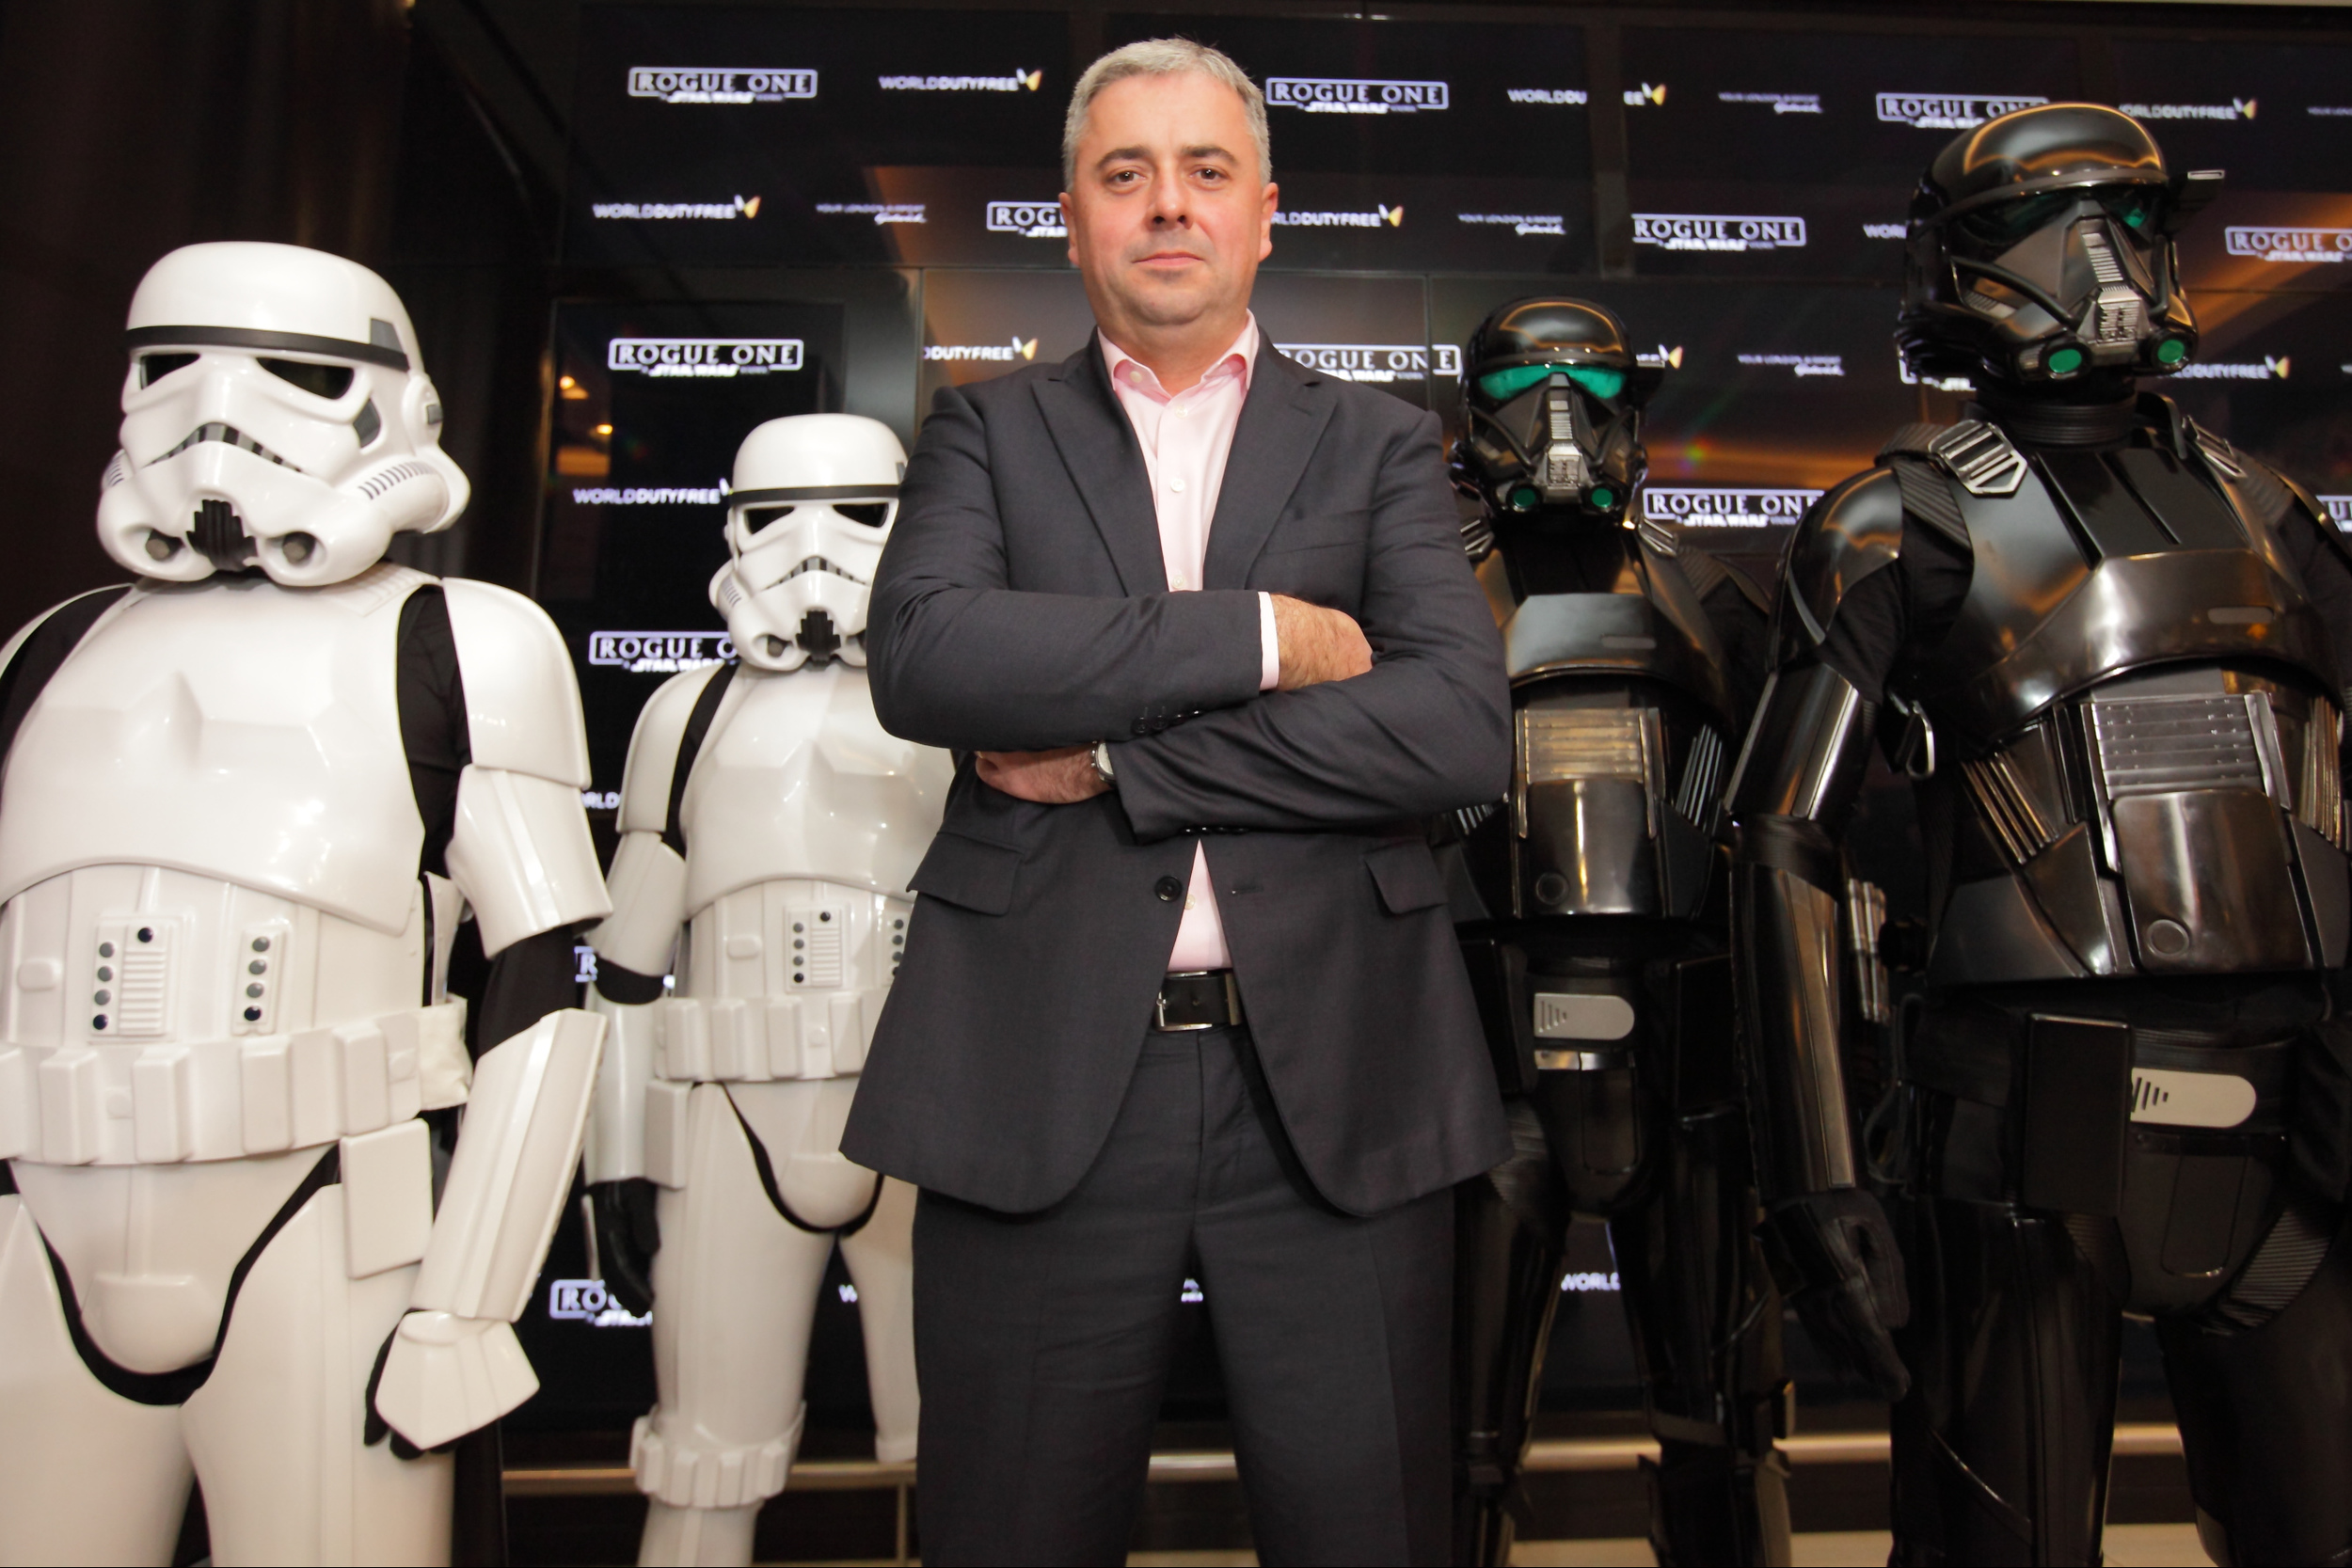 Gatwick's Chief Executive Stewart Wingate guarded by stormtroopers and Death Troopers, in World Duty Free at Gatwick South today where passengers can experience Rogue One: A Star Wars Story ahead of the cinema release on 15th December